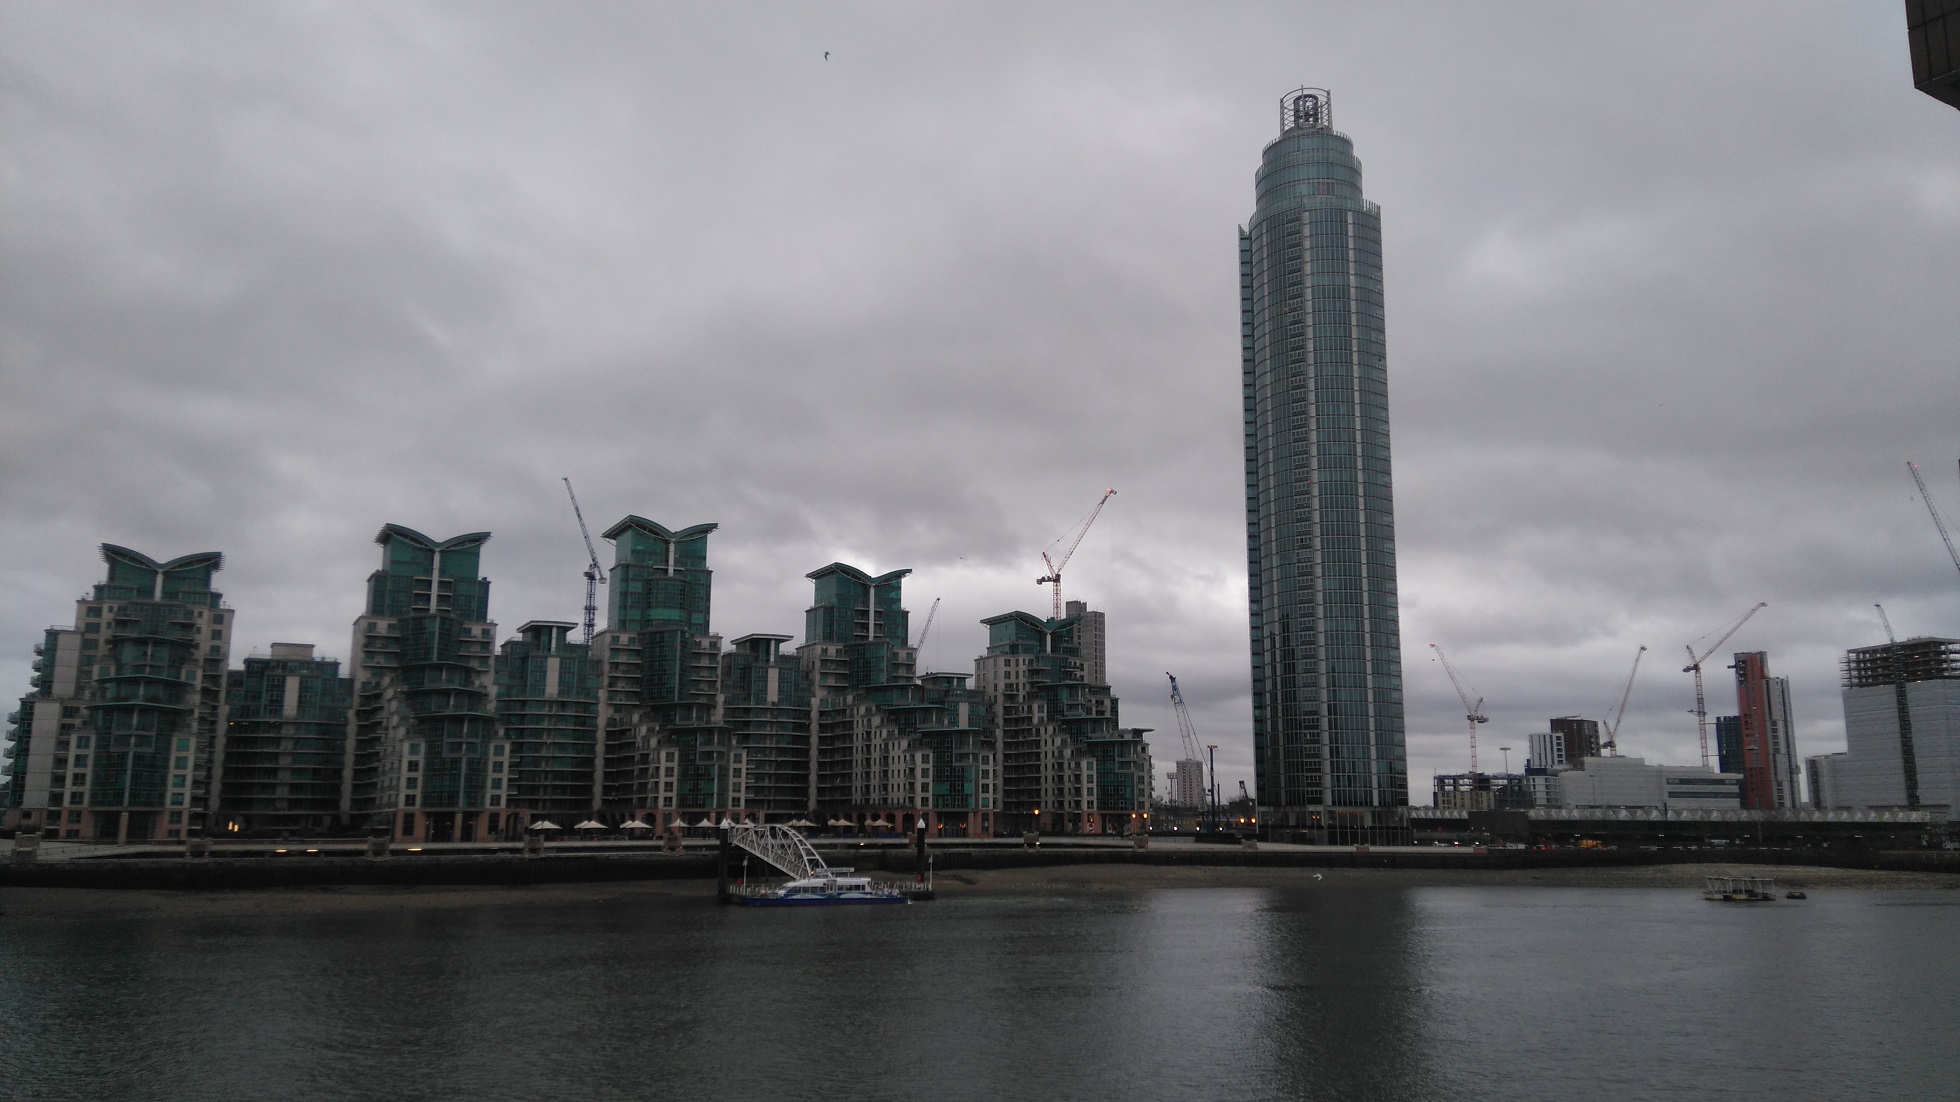 The Tower and Kestrel House buildings viewed from the north side of the river Thames in London on a cloudy day